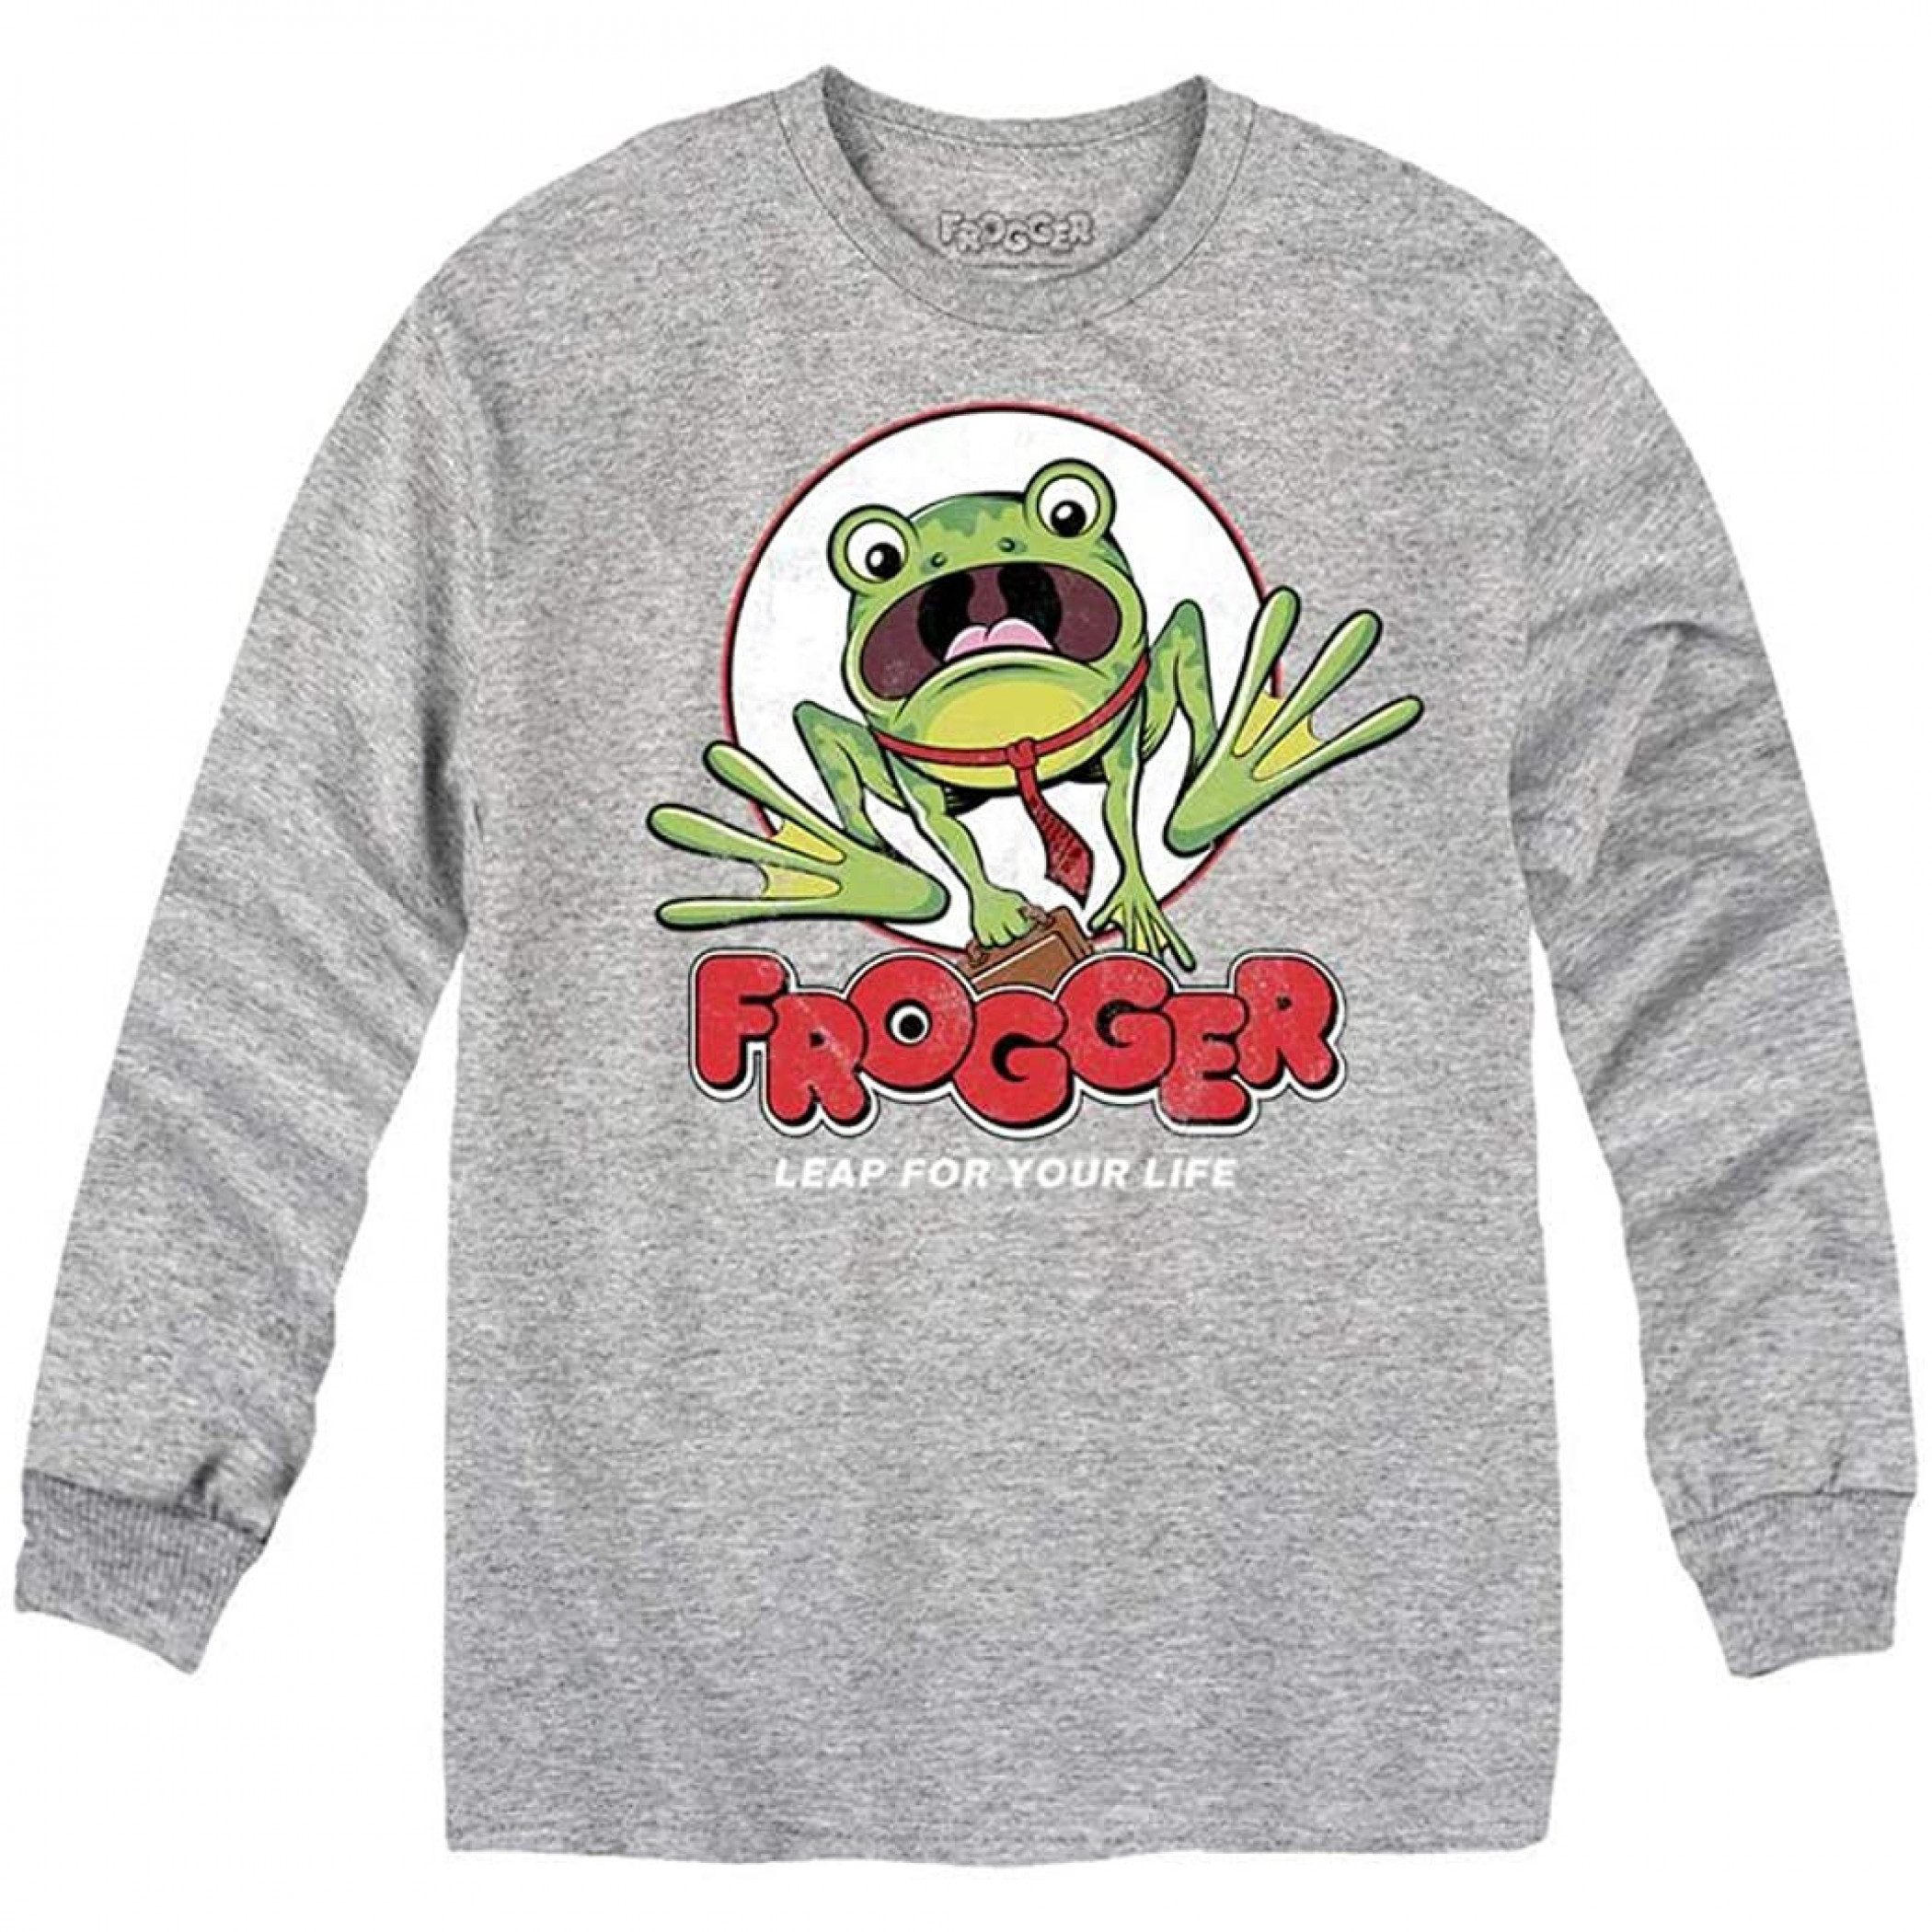 Frogger Leap For Your Life Long Sleeve Shirt